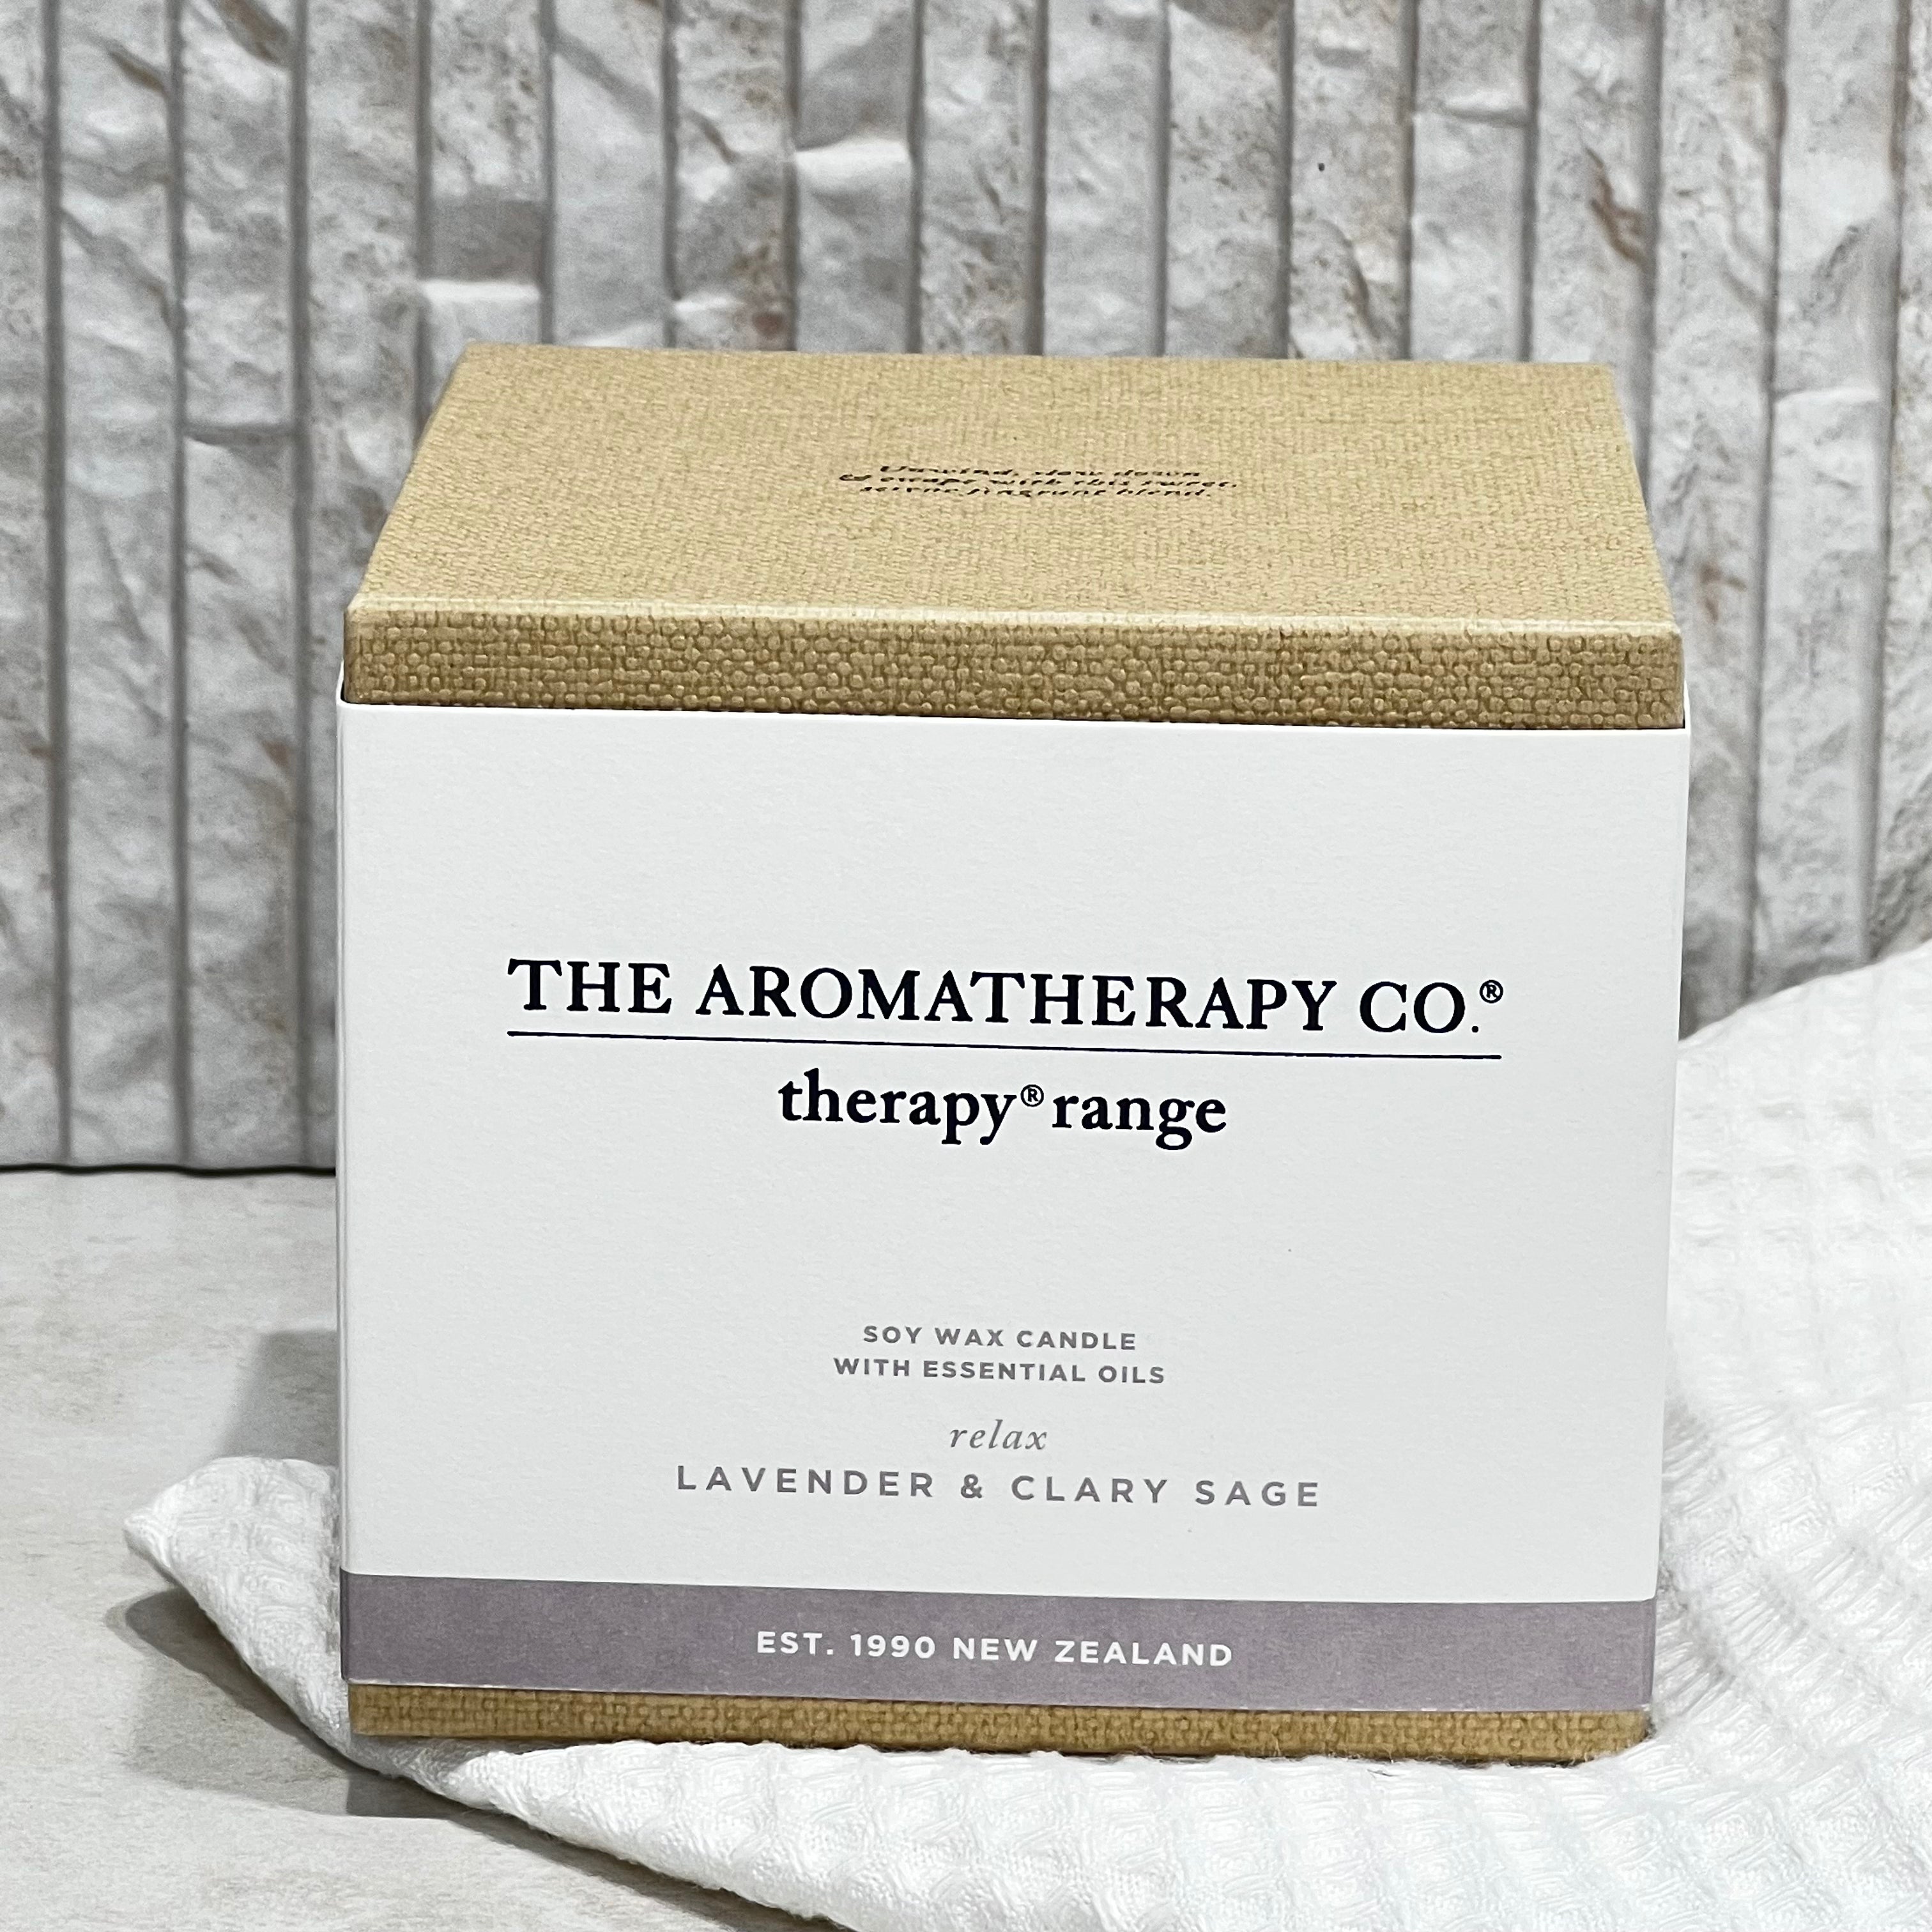 The Aromatherapy Co Therapy Range Relax Lavender & Clary Sage Candle